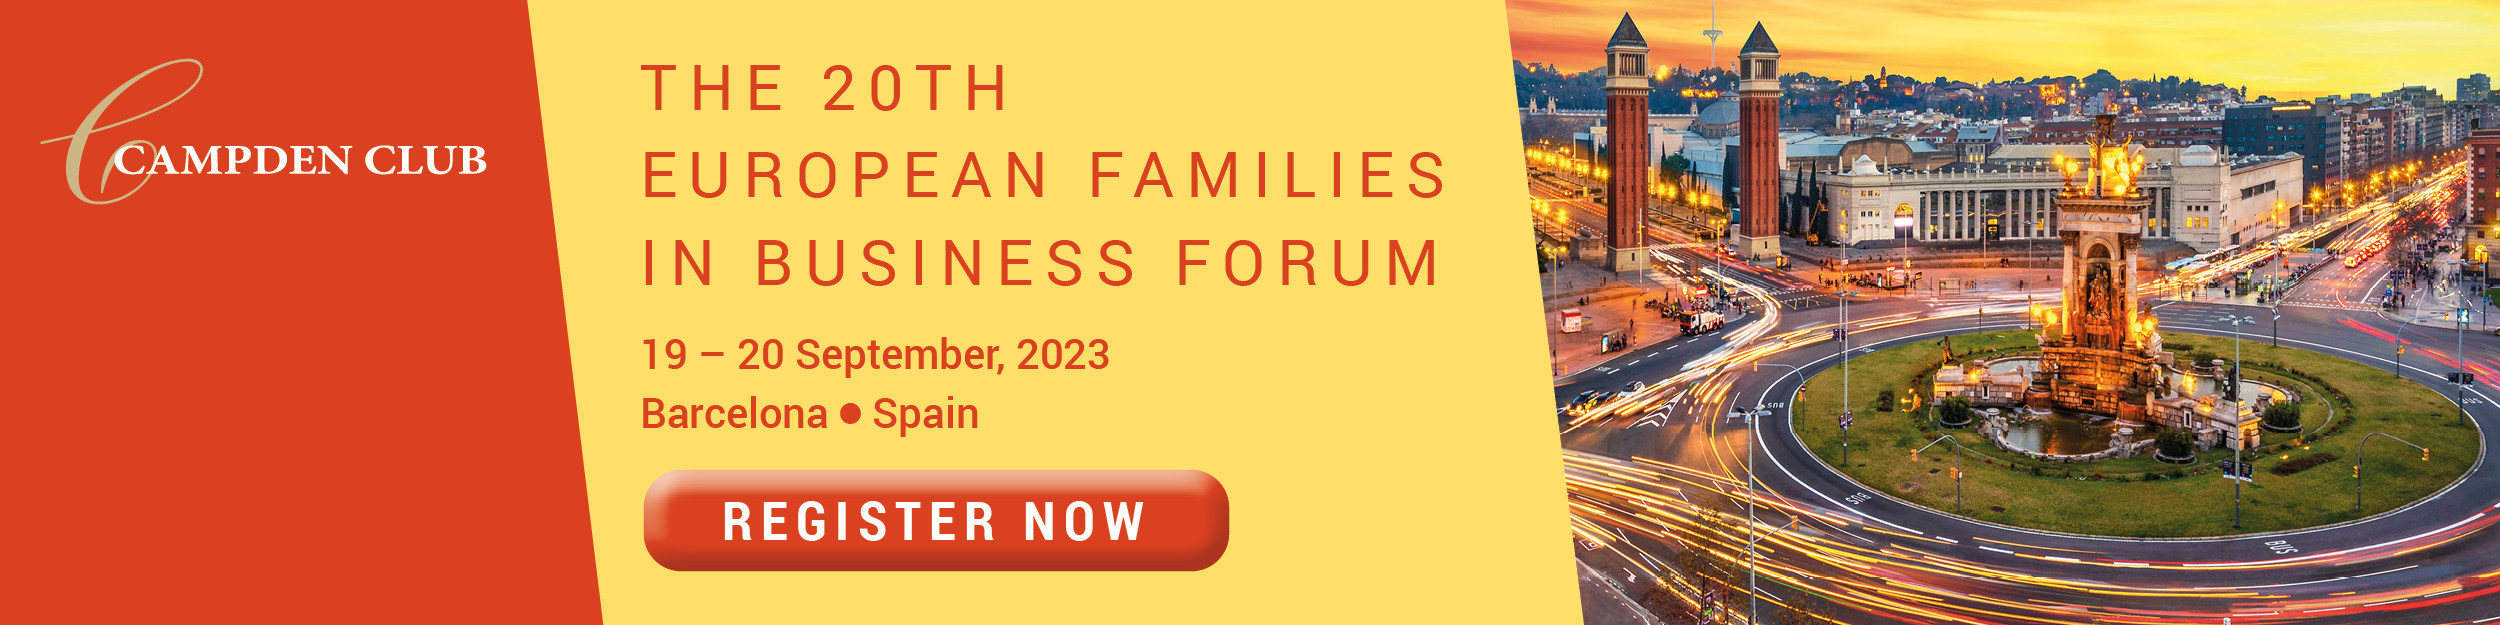 The 20th European Families in Business Forum